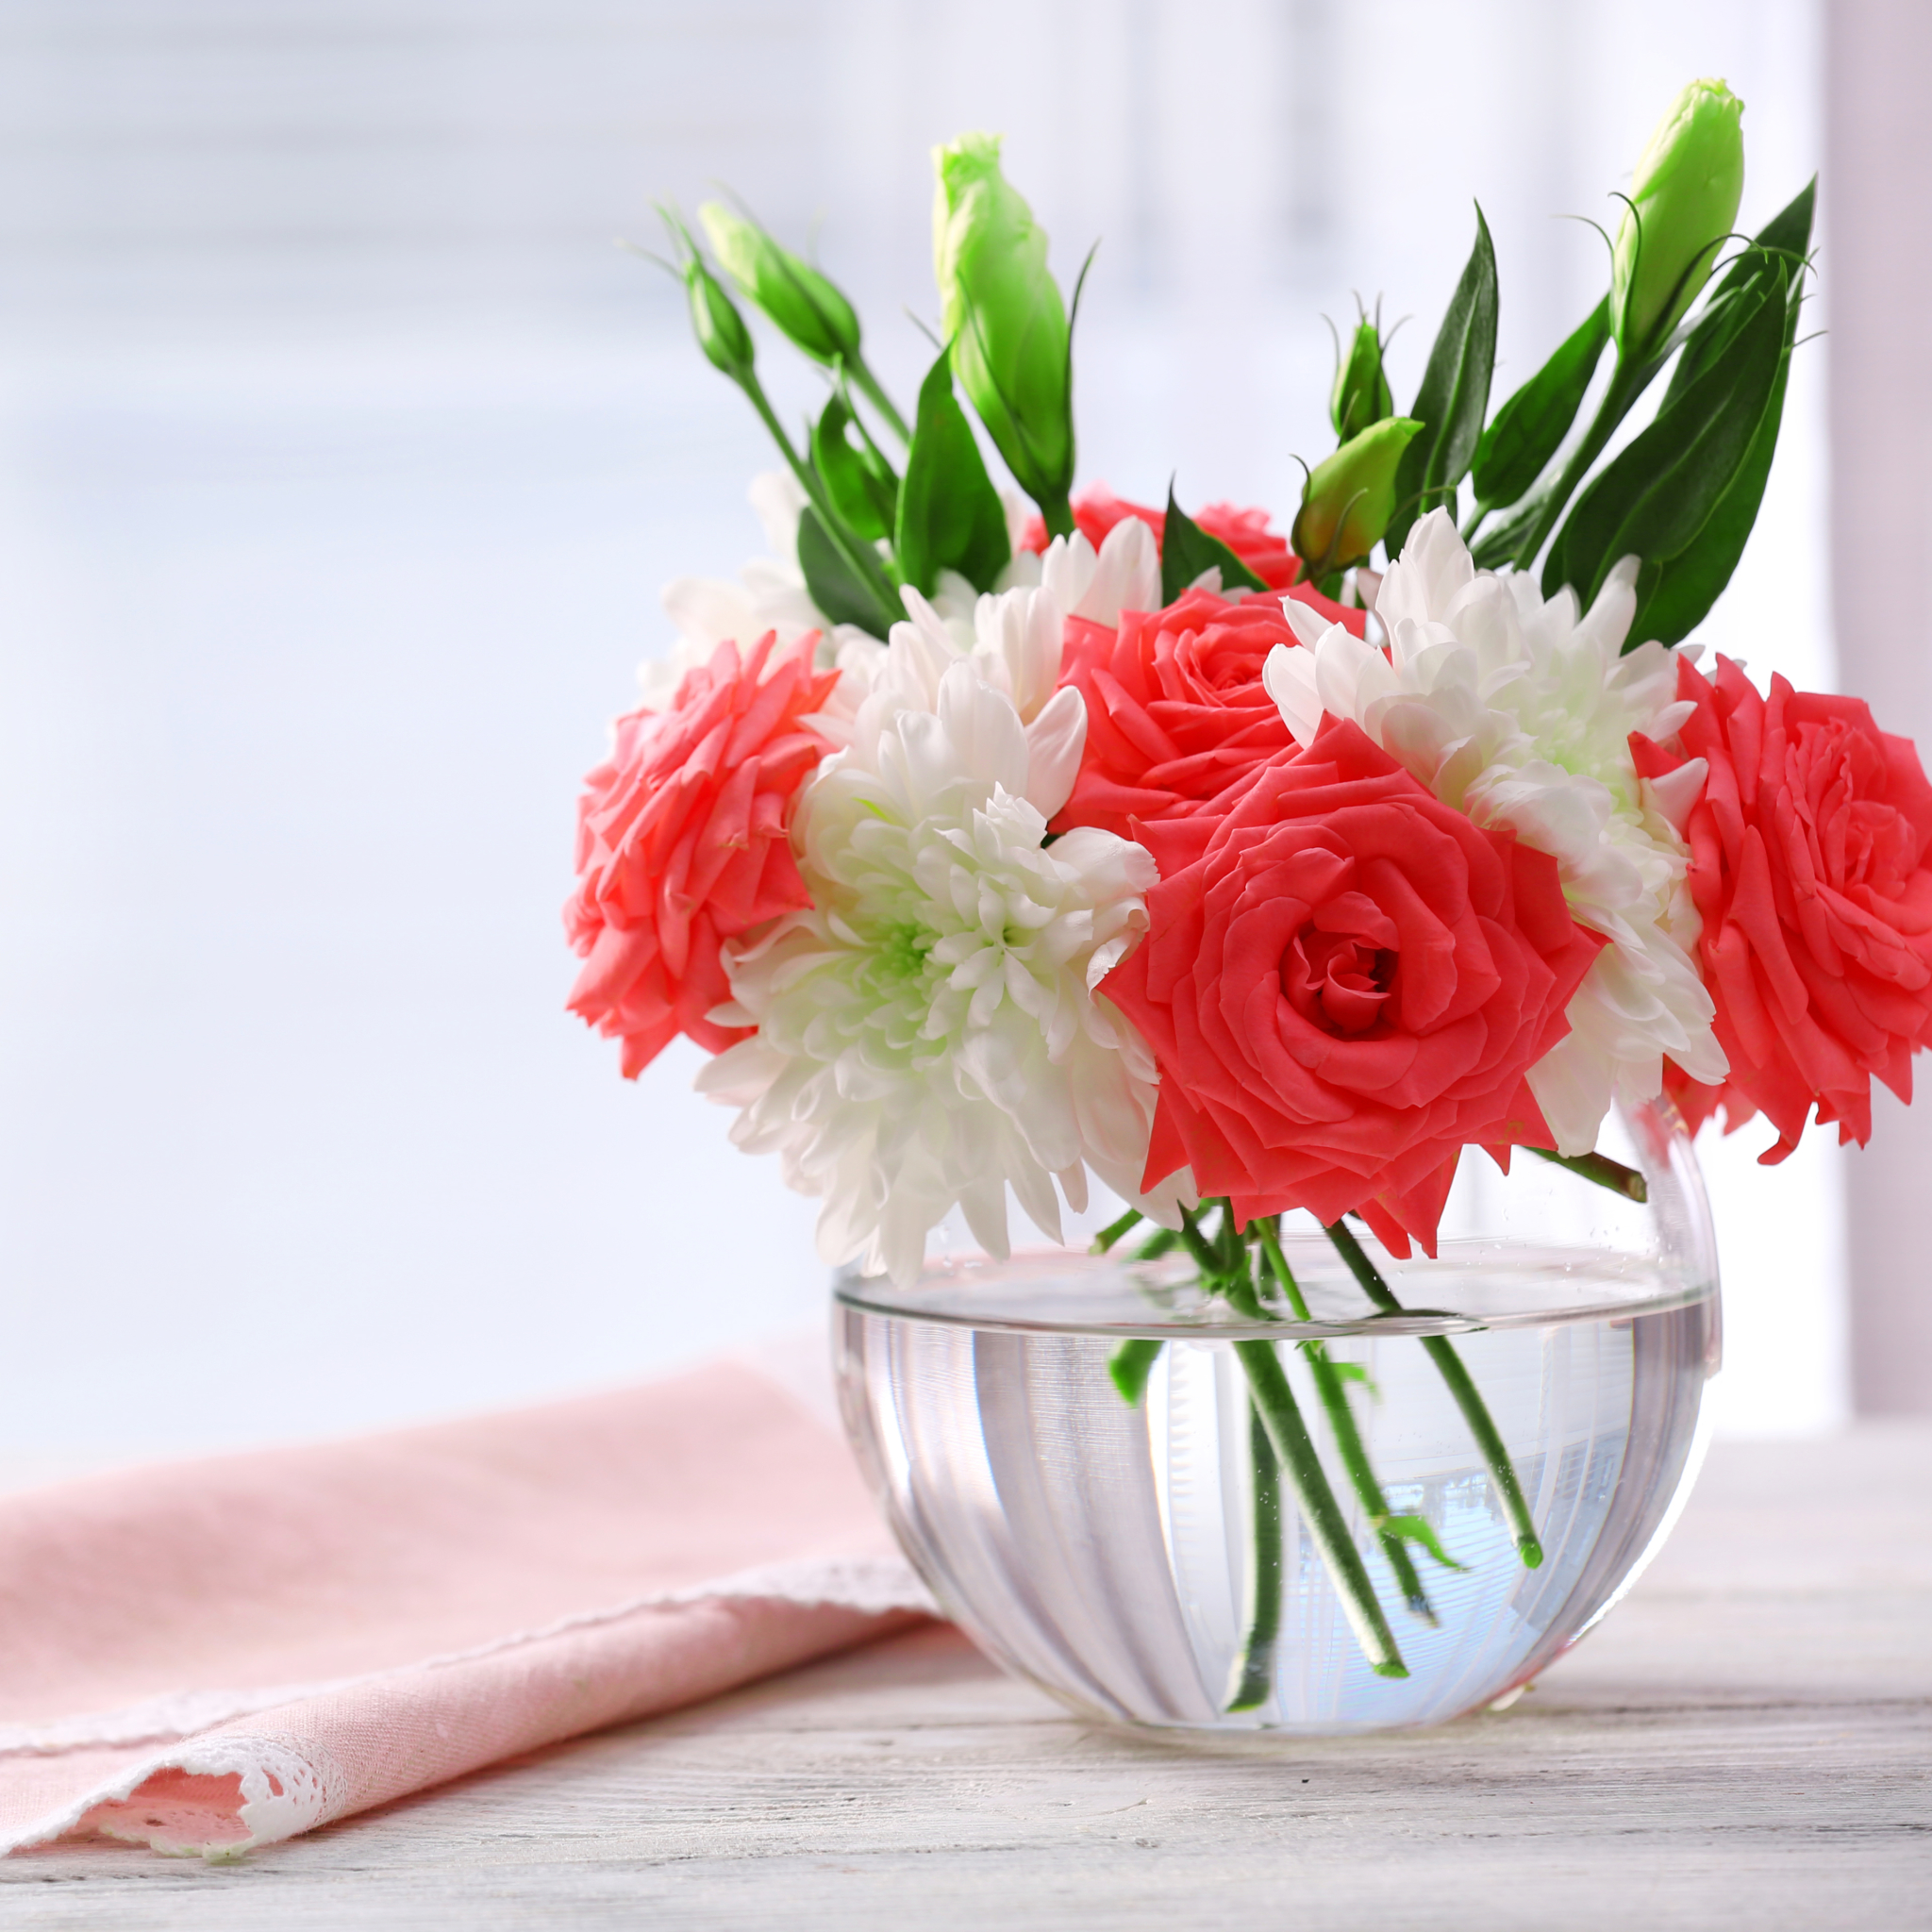 Roses and Eustoma in Small Vase